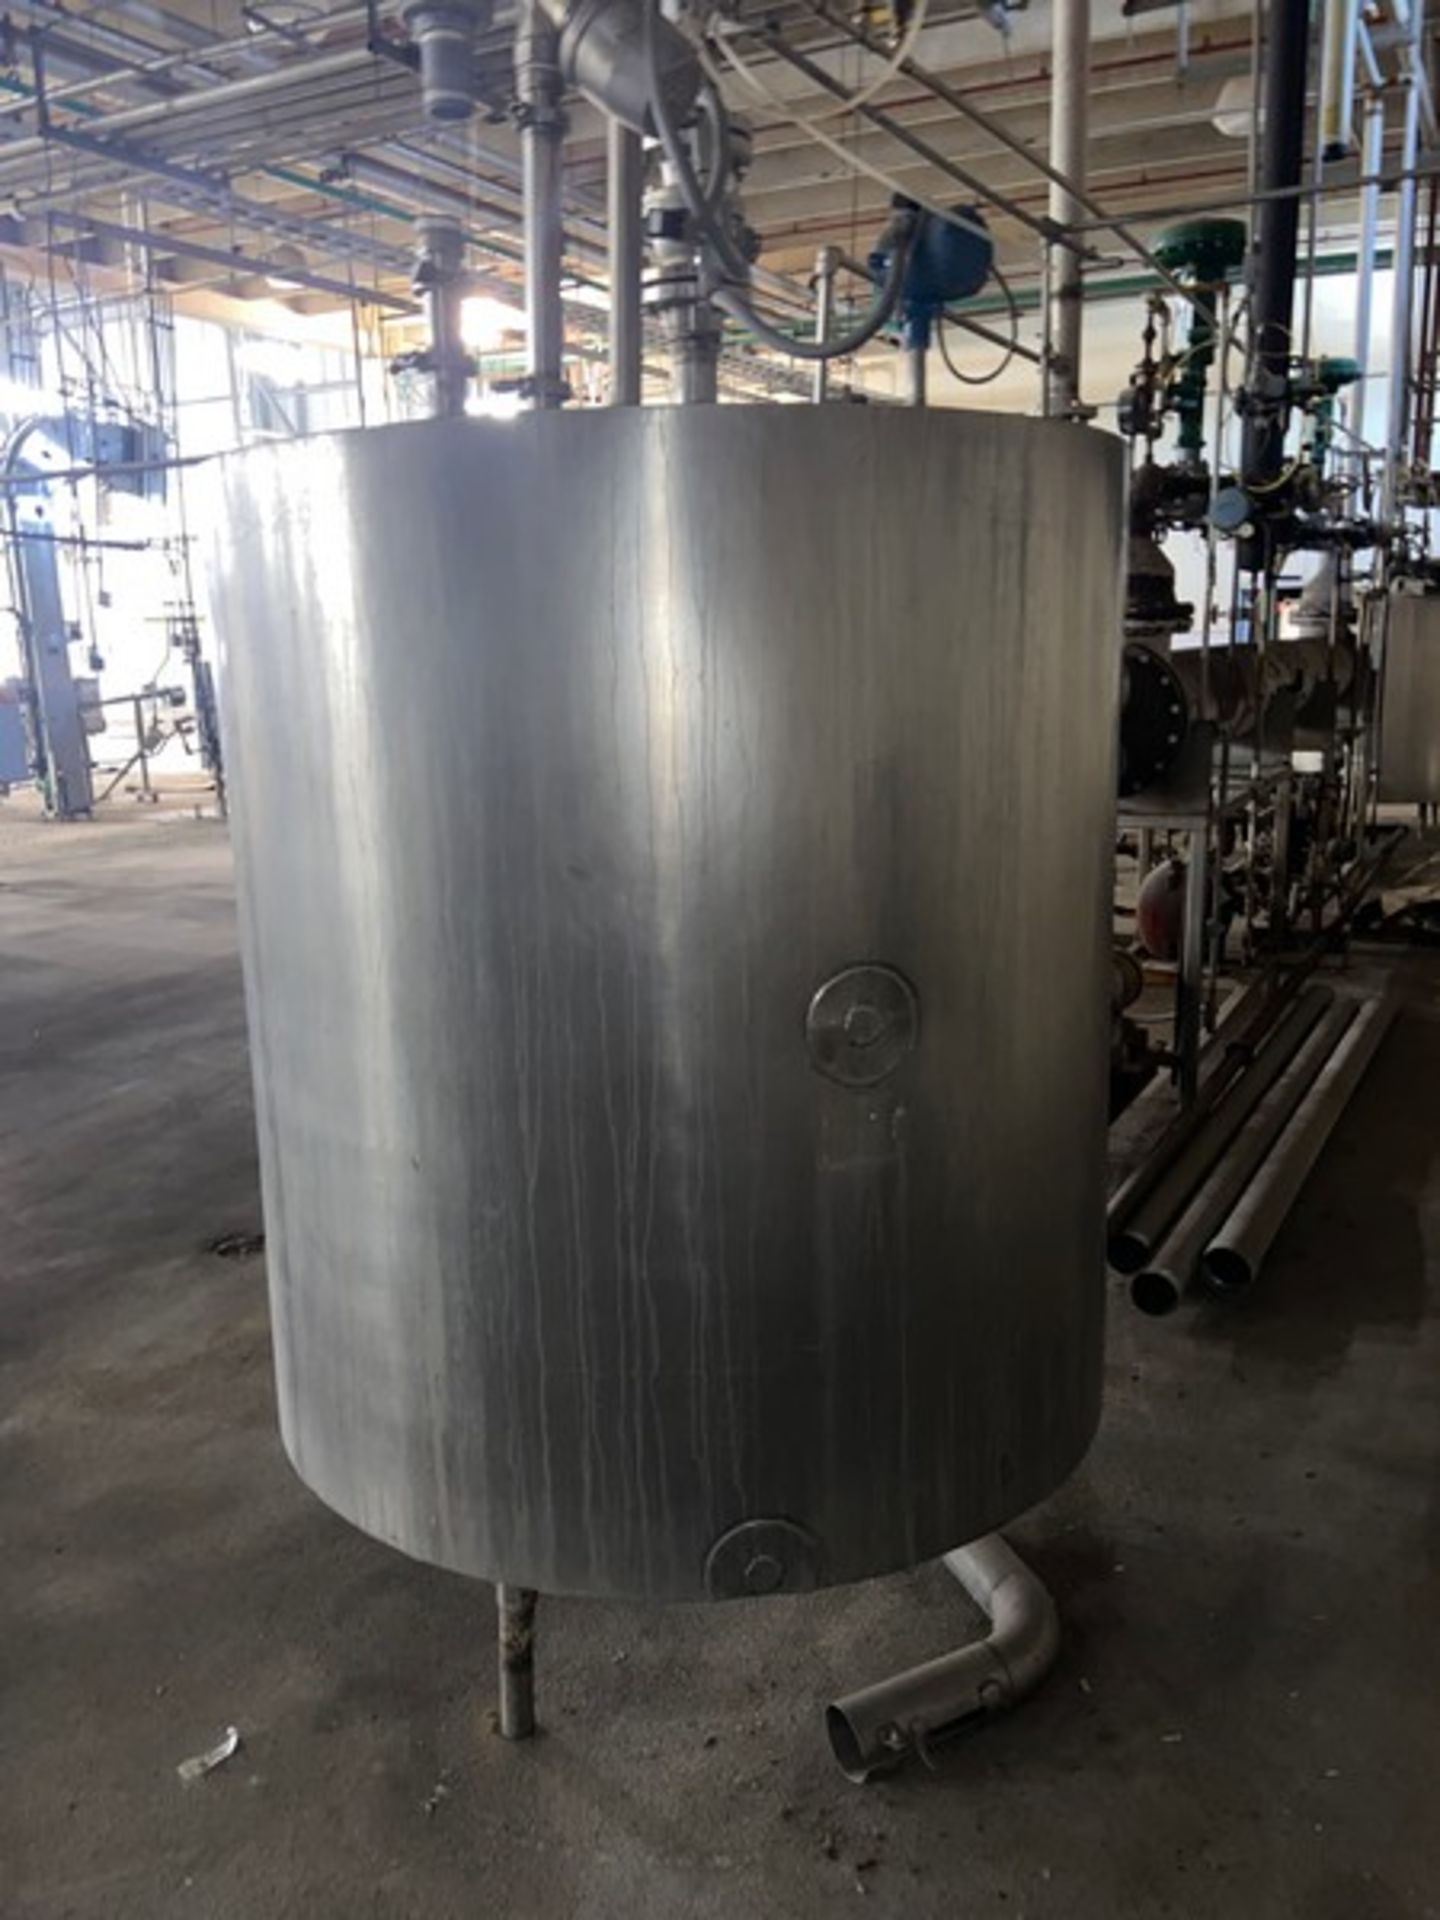 Damrow Bros. 400 Gal. S/S Vertical Insulated Tank, S/N 25609, with S/S Hinge Lid, Mounted on S/S - Image 3 of 16